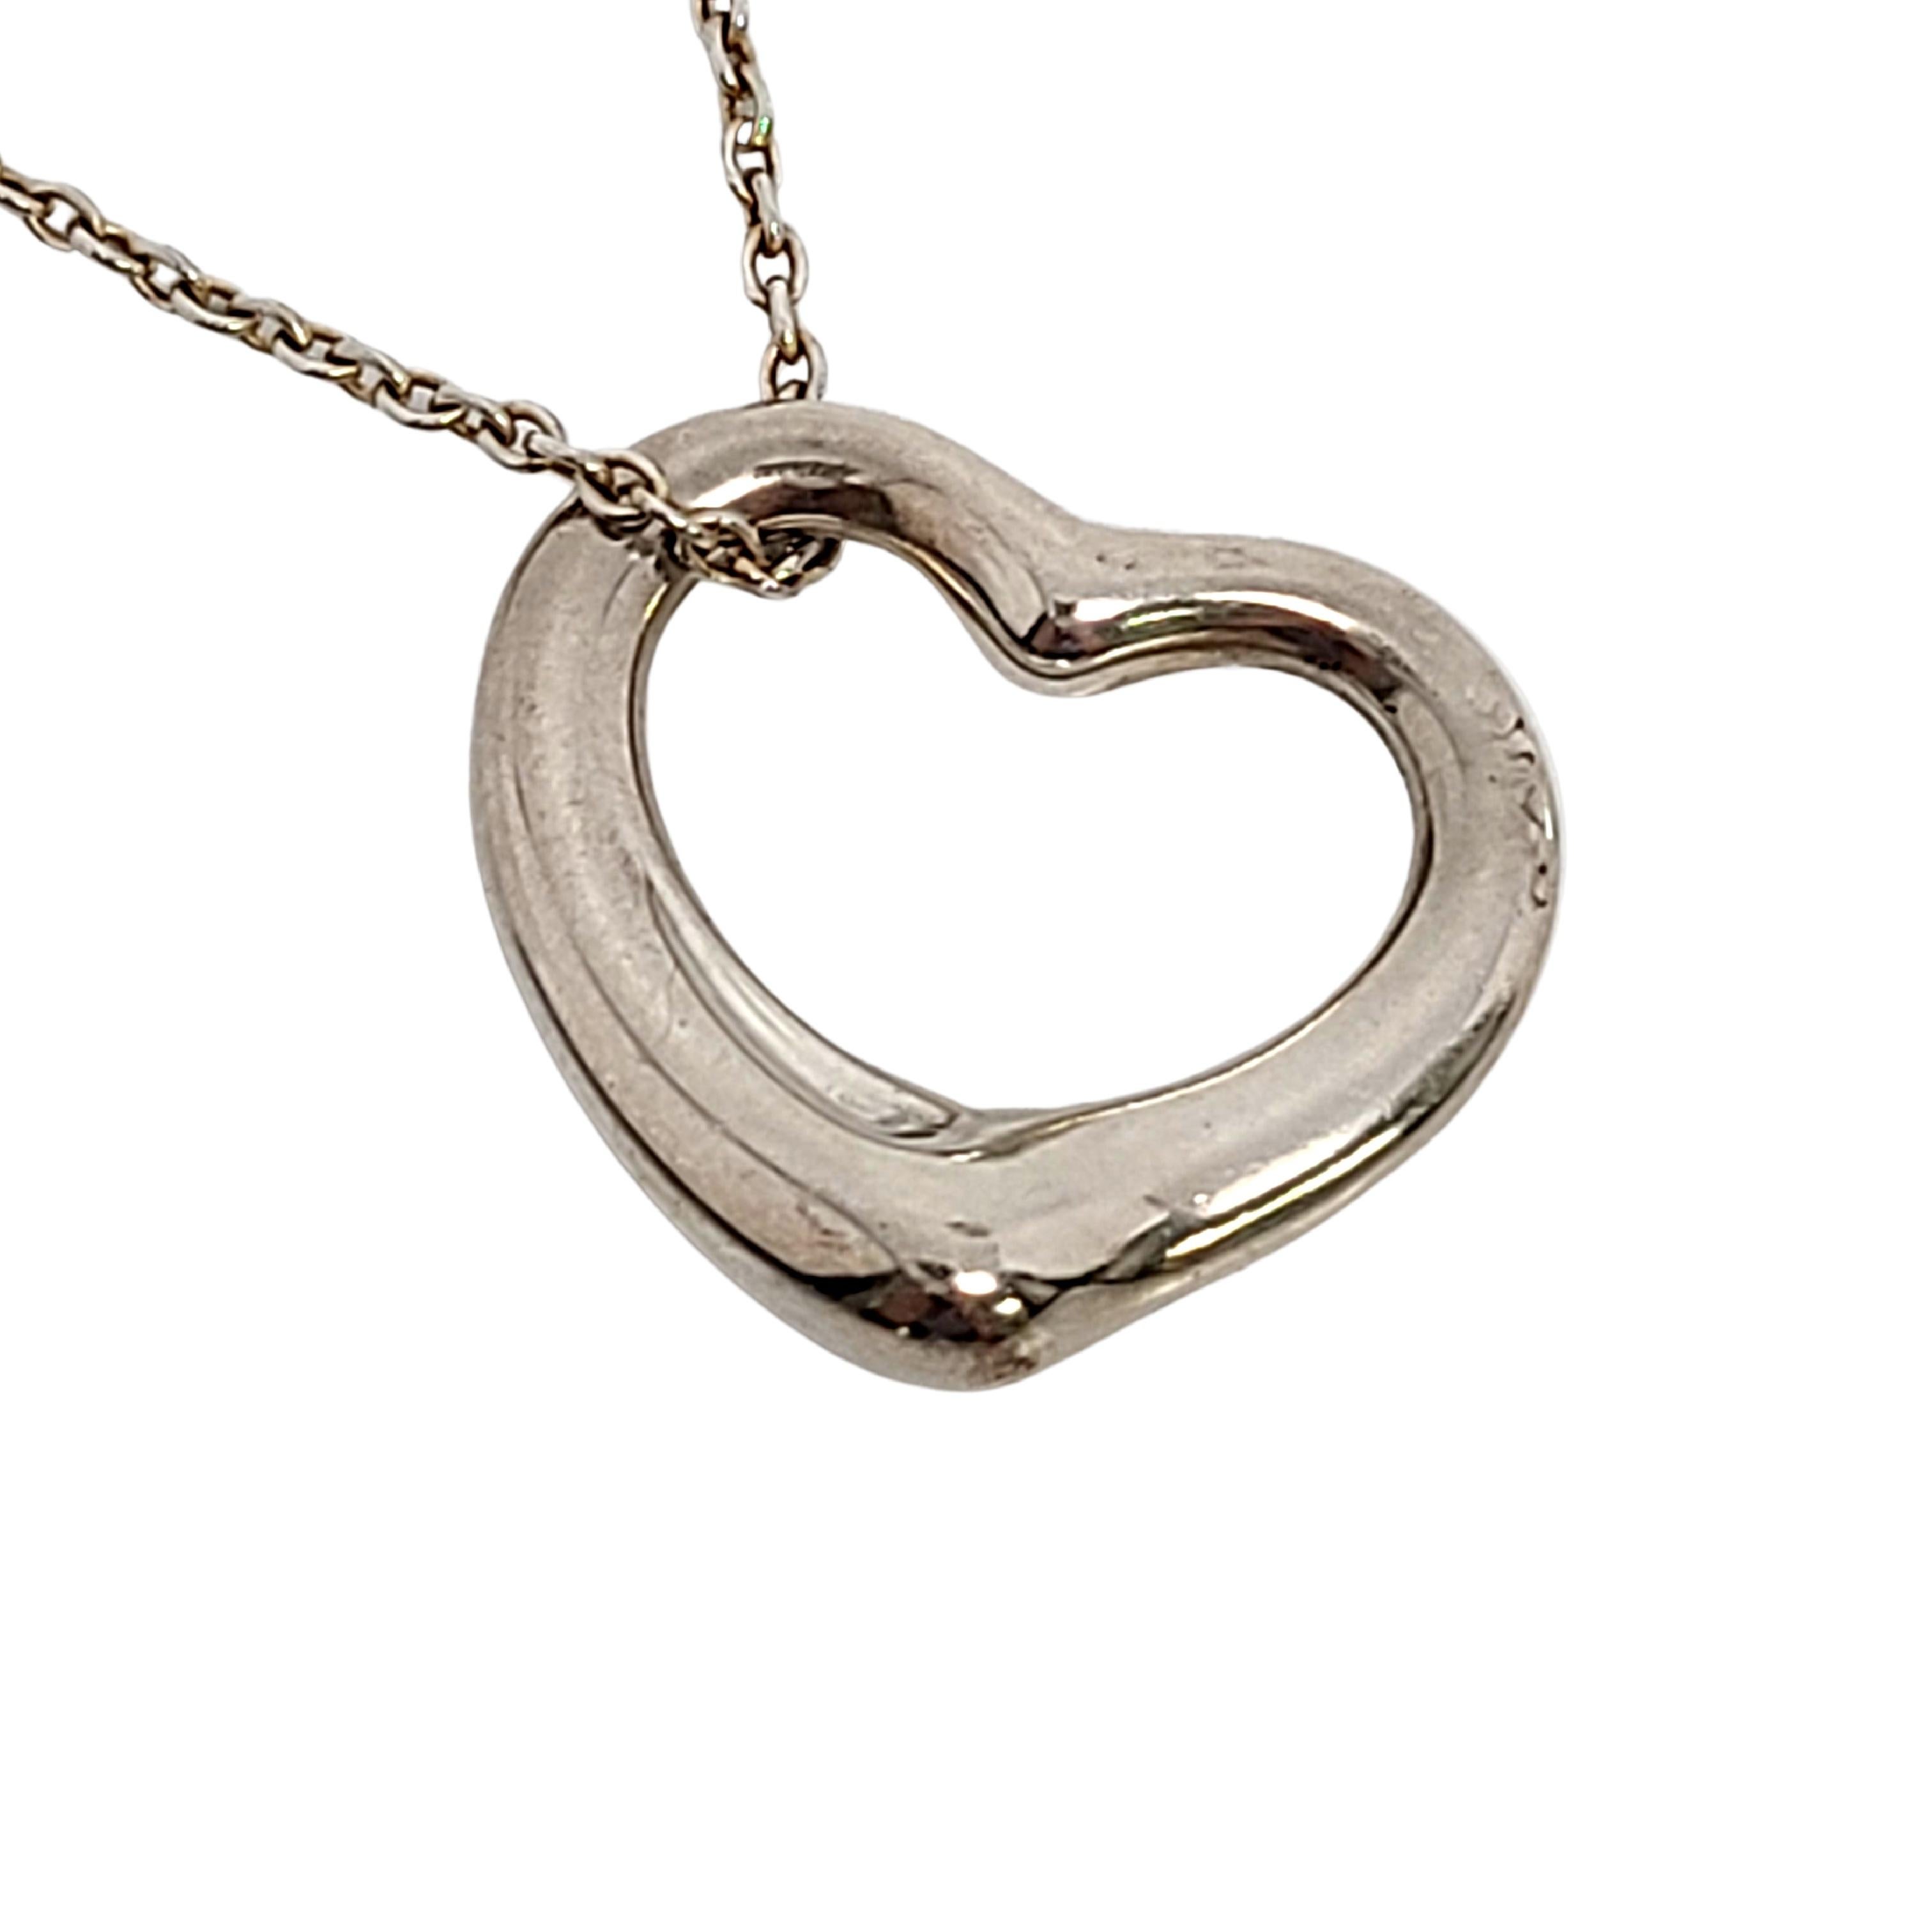 Tiffany & Co sterling silver Open Heart pendant with chain by Elsa Peretti.

An authentic Tiffany & Co necklace featuring a sterling silver pendant in Elsa Peretti's timeless signature open heart design on a delicate chain. Tiffany pouch and box not